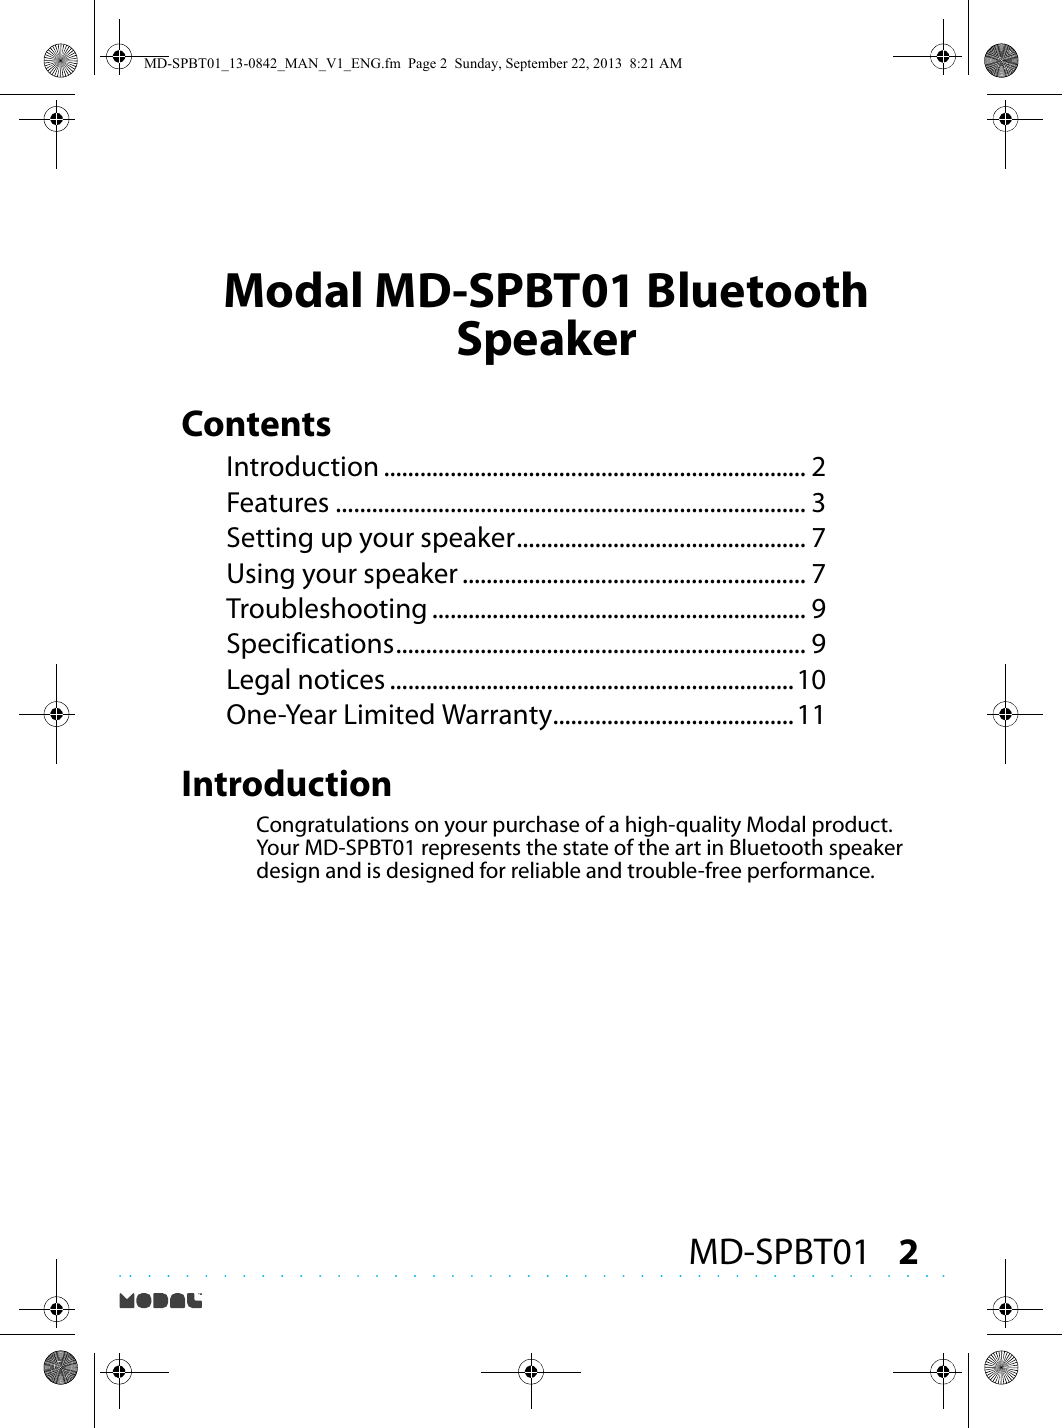 2MD-SPBT01Modal MD-SPBT01 Bluetooth SpeakerContentsIntroduction ...................................................................... 2Features .............................................................................. 3Setting up your speaker................................................ 7Using your speaker ......................................................... 7Troubleshooting .............................................................. 9Specifications.................................................................... 9Legal notices ...................................................................10One-Year Limited Warranty........................................11IntroductionCongratulations on your purchase of a high-quality Modal product. Your MD-SPBT01 represents the state of the art in Bluetooth speaker design and is designed for reliable and trouble-free performance.MD-SPBT01_13-0842_MAN_V1_ENG.fm  Page 2  Sunday, September 22, 2013  8:21 AM